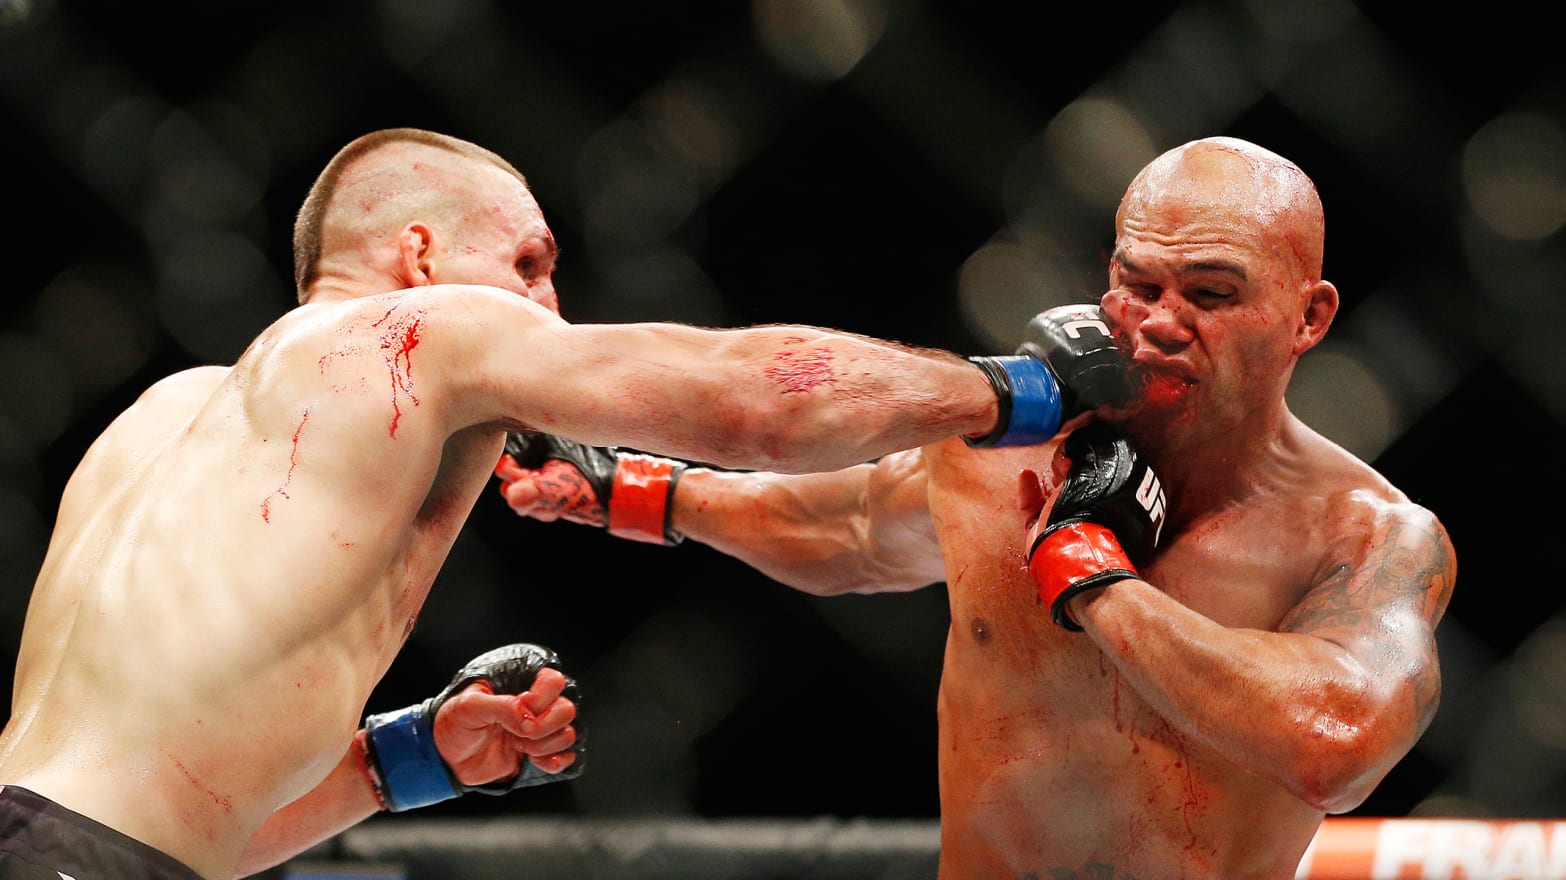 Hey UFC, Bring Back Bare-knuckle Fights to Stop Brain Trauma